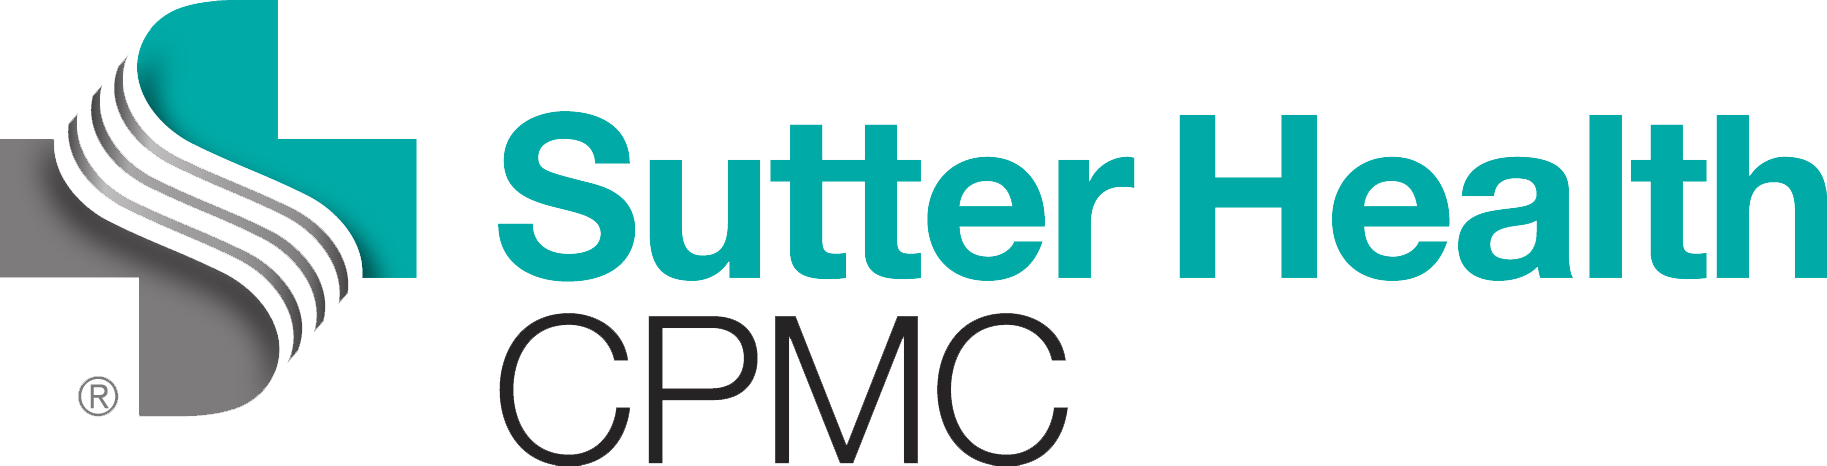 logo_sutter health cpmc 2017-notag.png